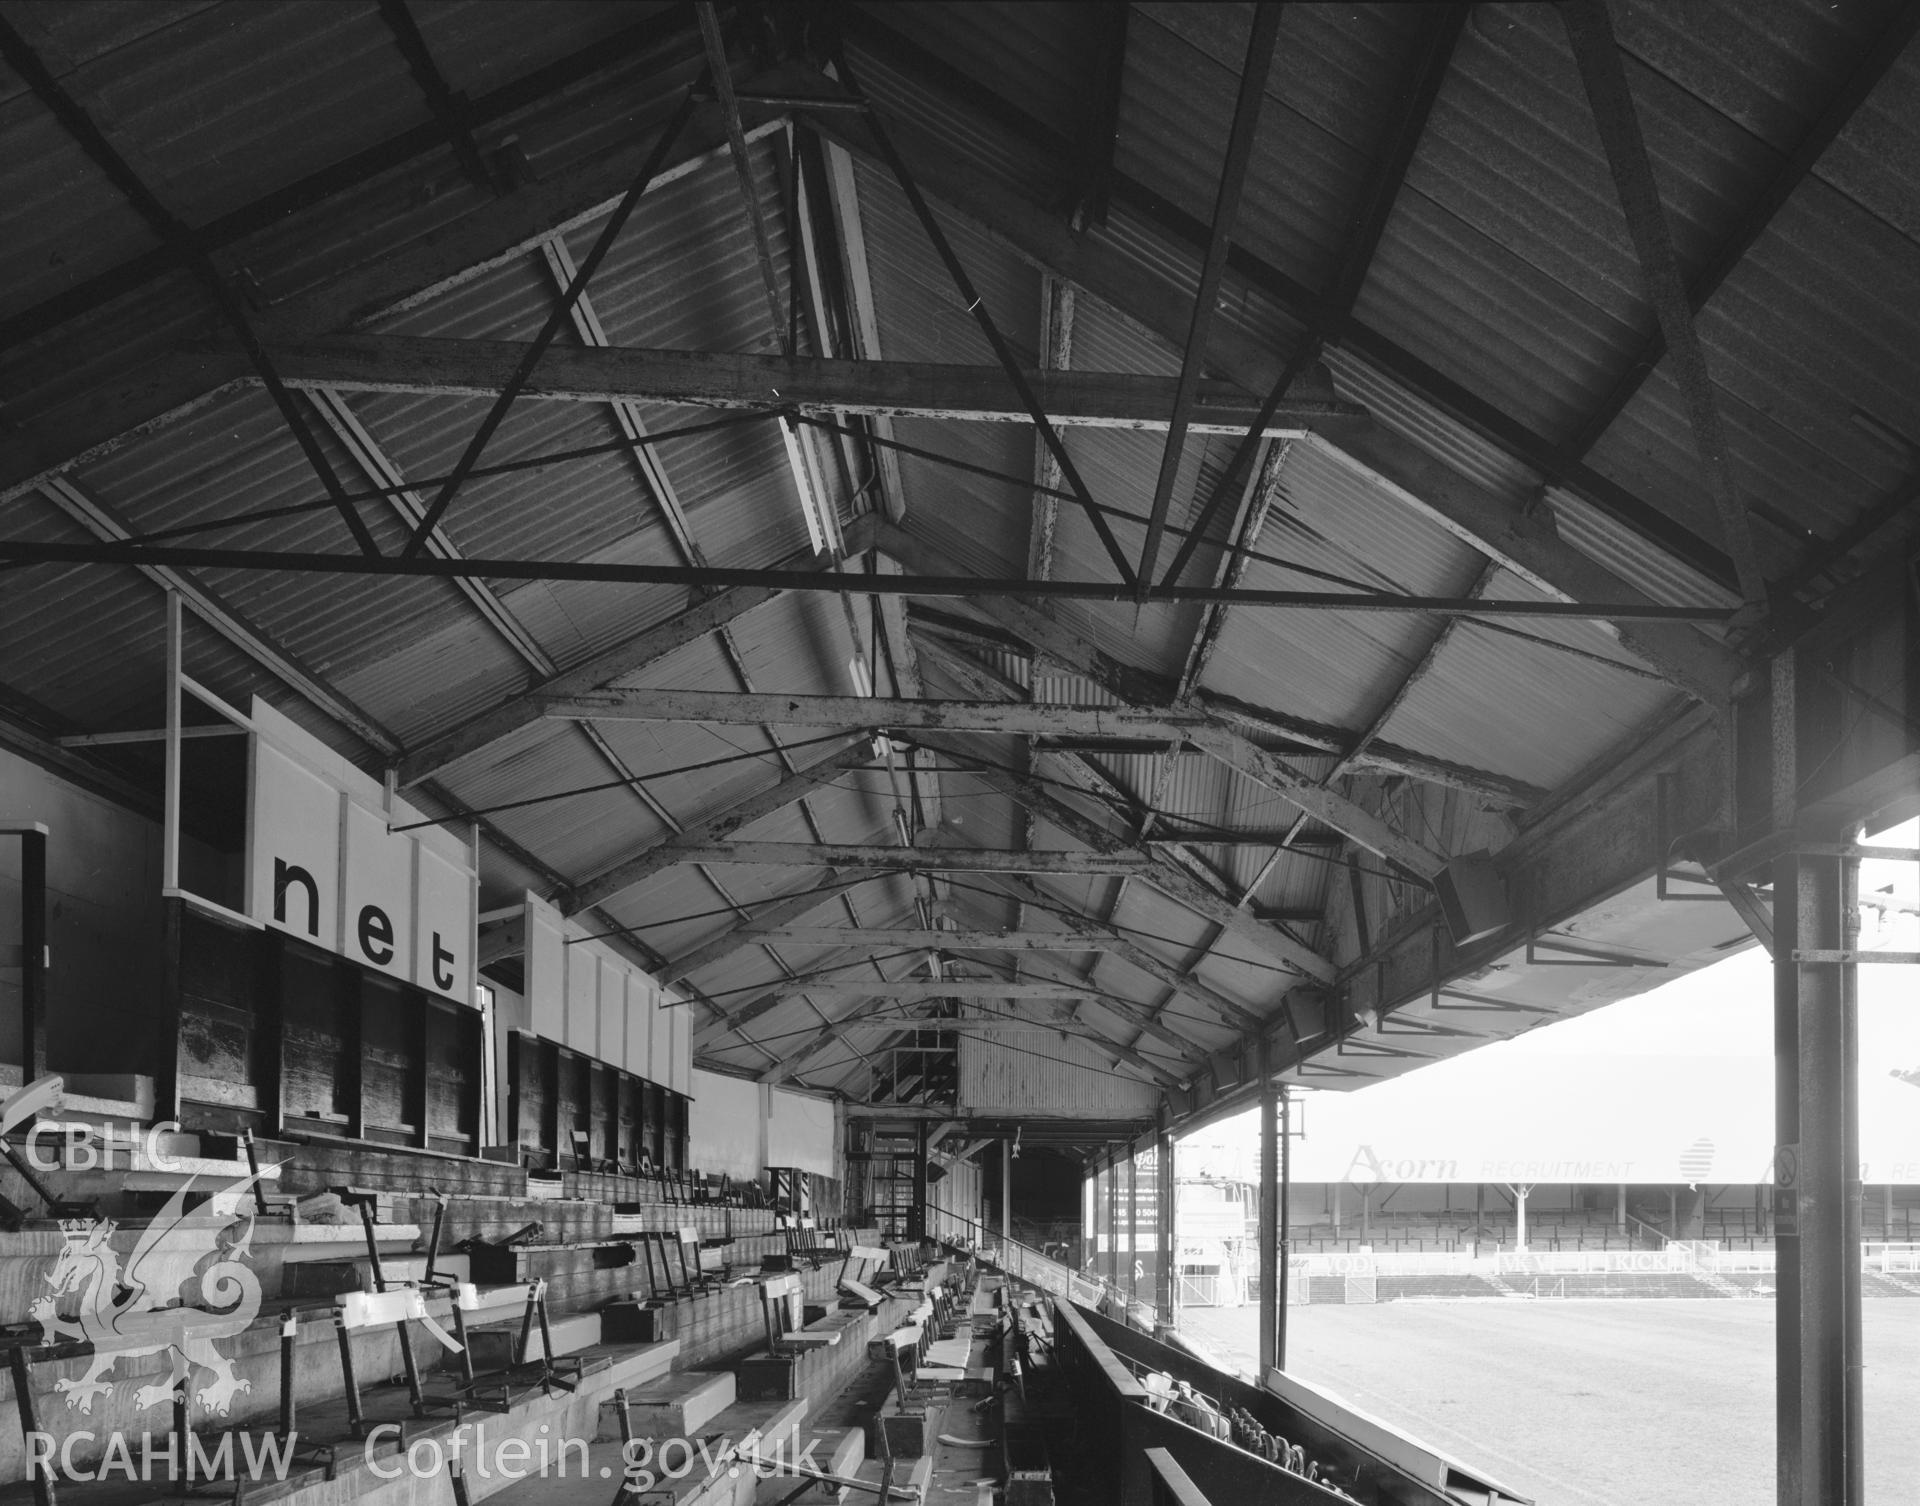 South Stand, interior roof structure, from east.